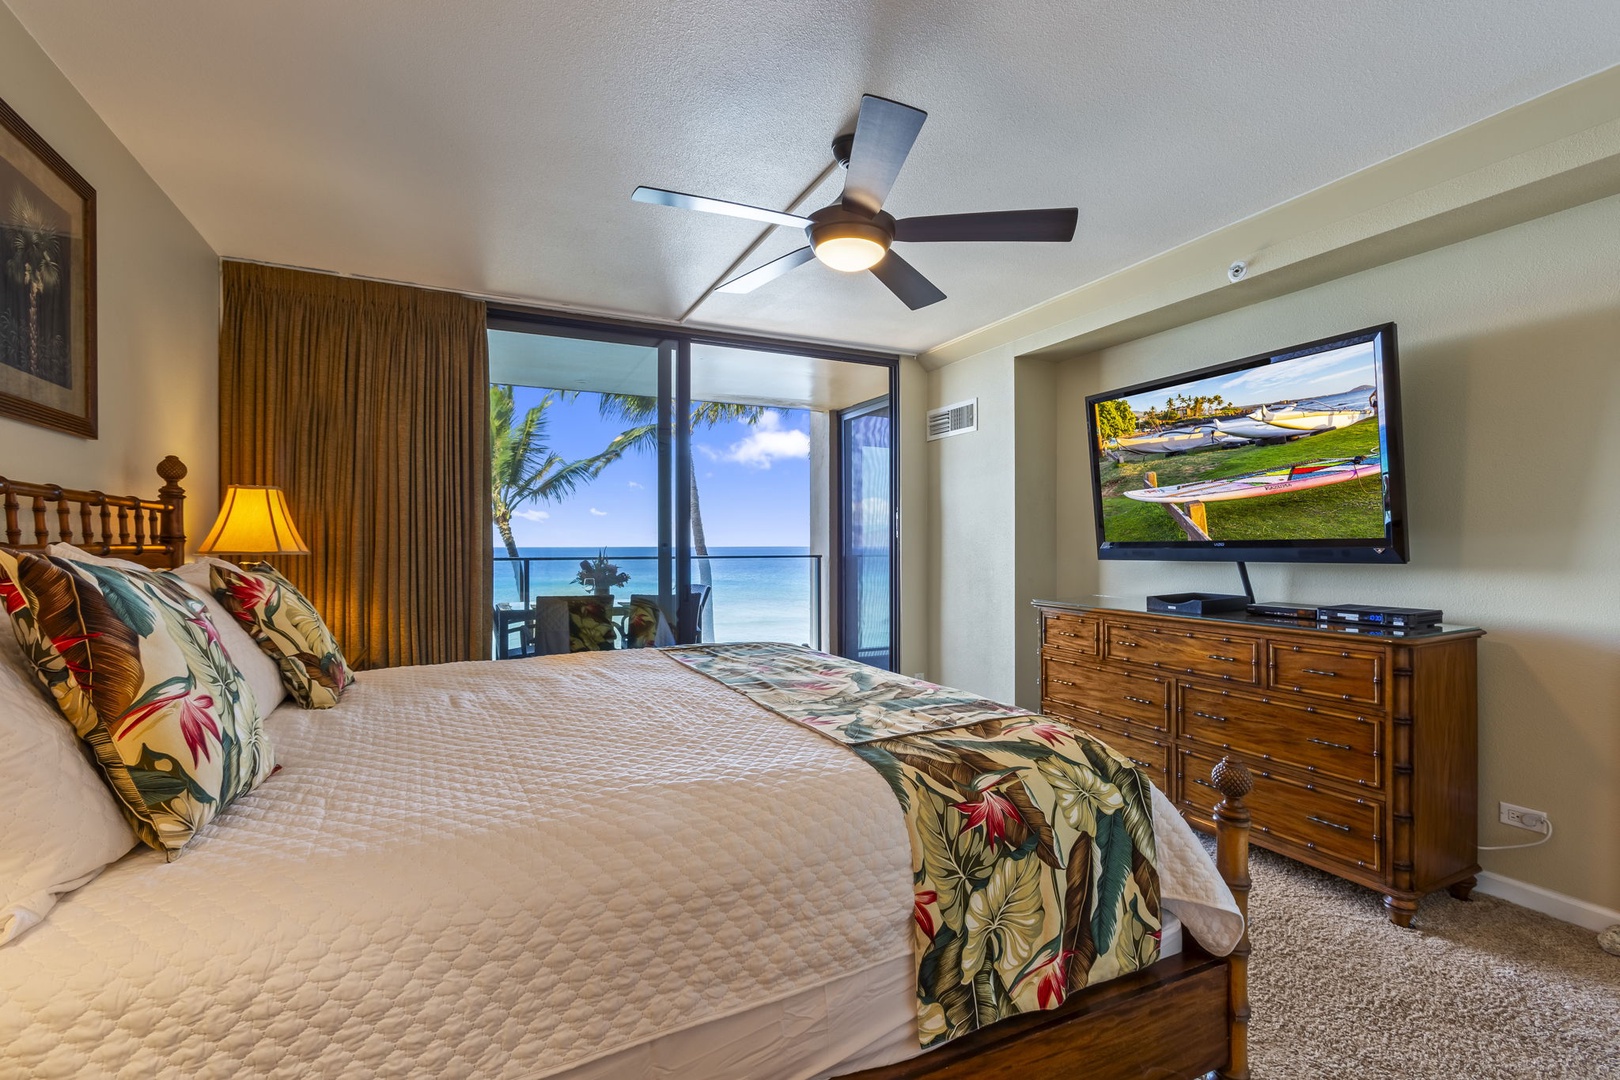 Bedroom with cal-king bed, lanai access, and ensuite